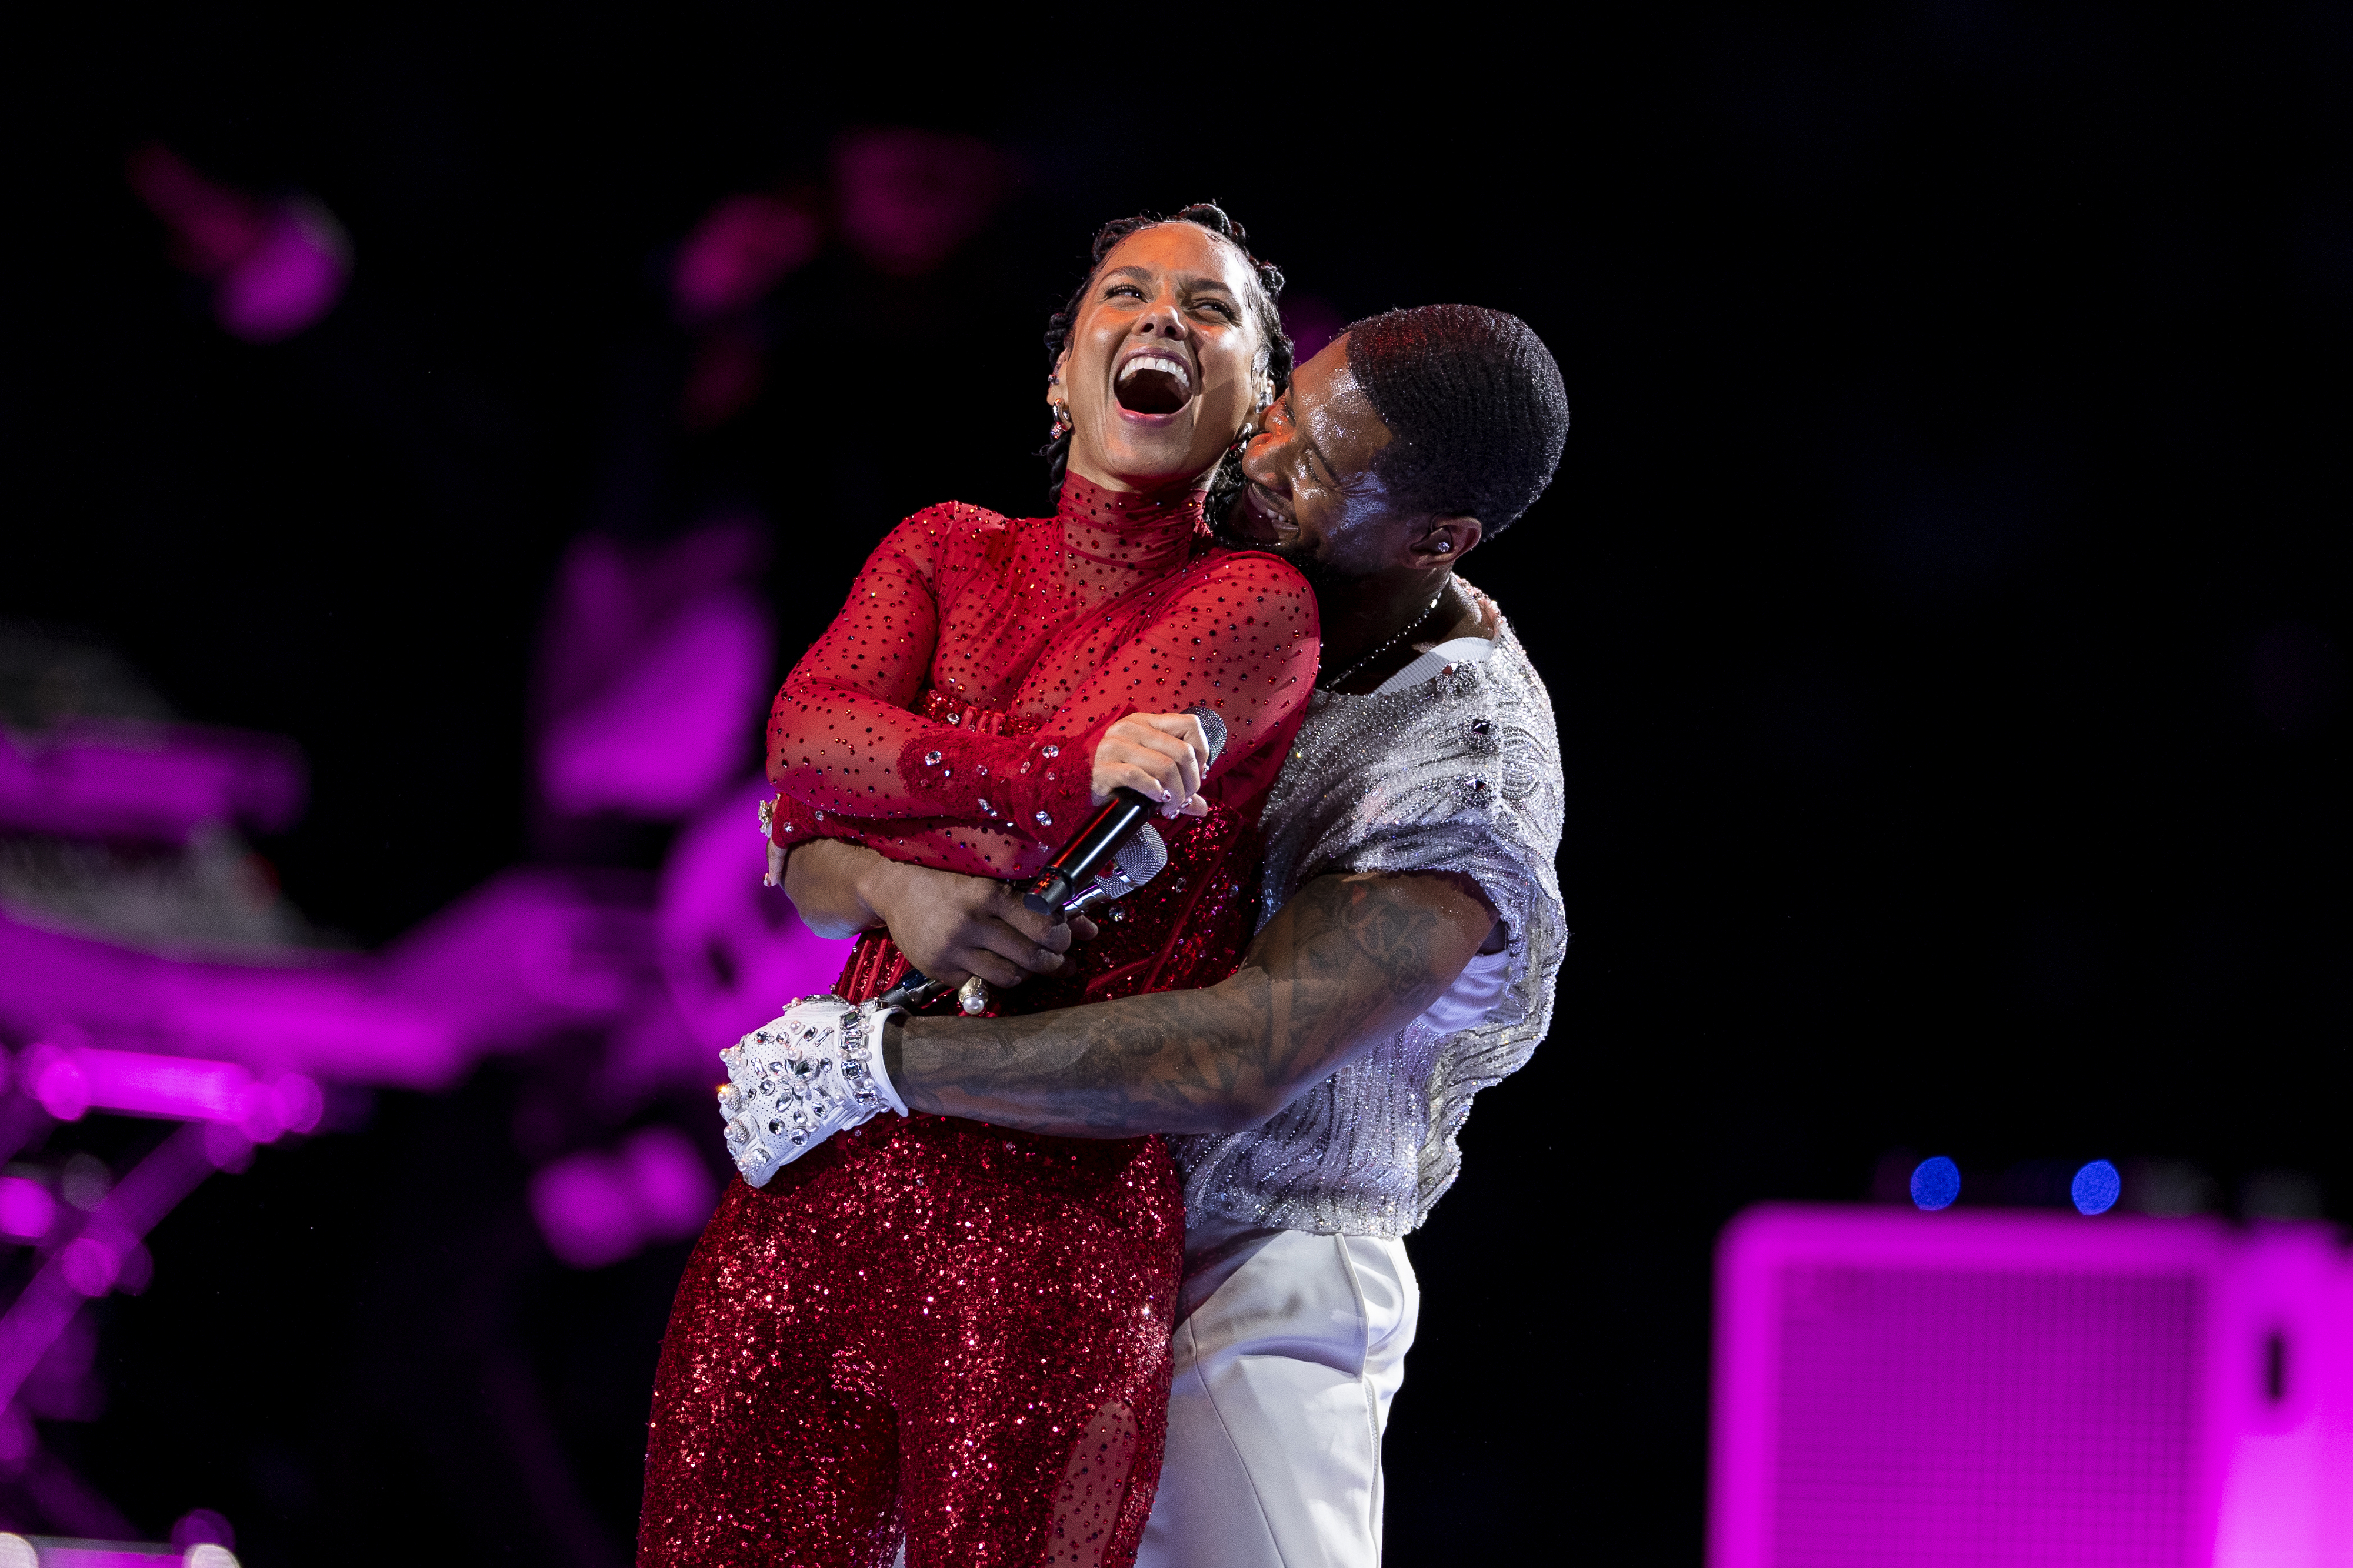 Alicia Keys and Usher onstage at the Super Bowl